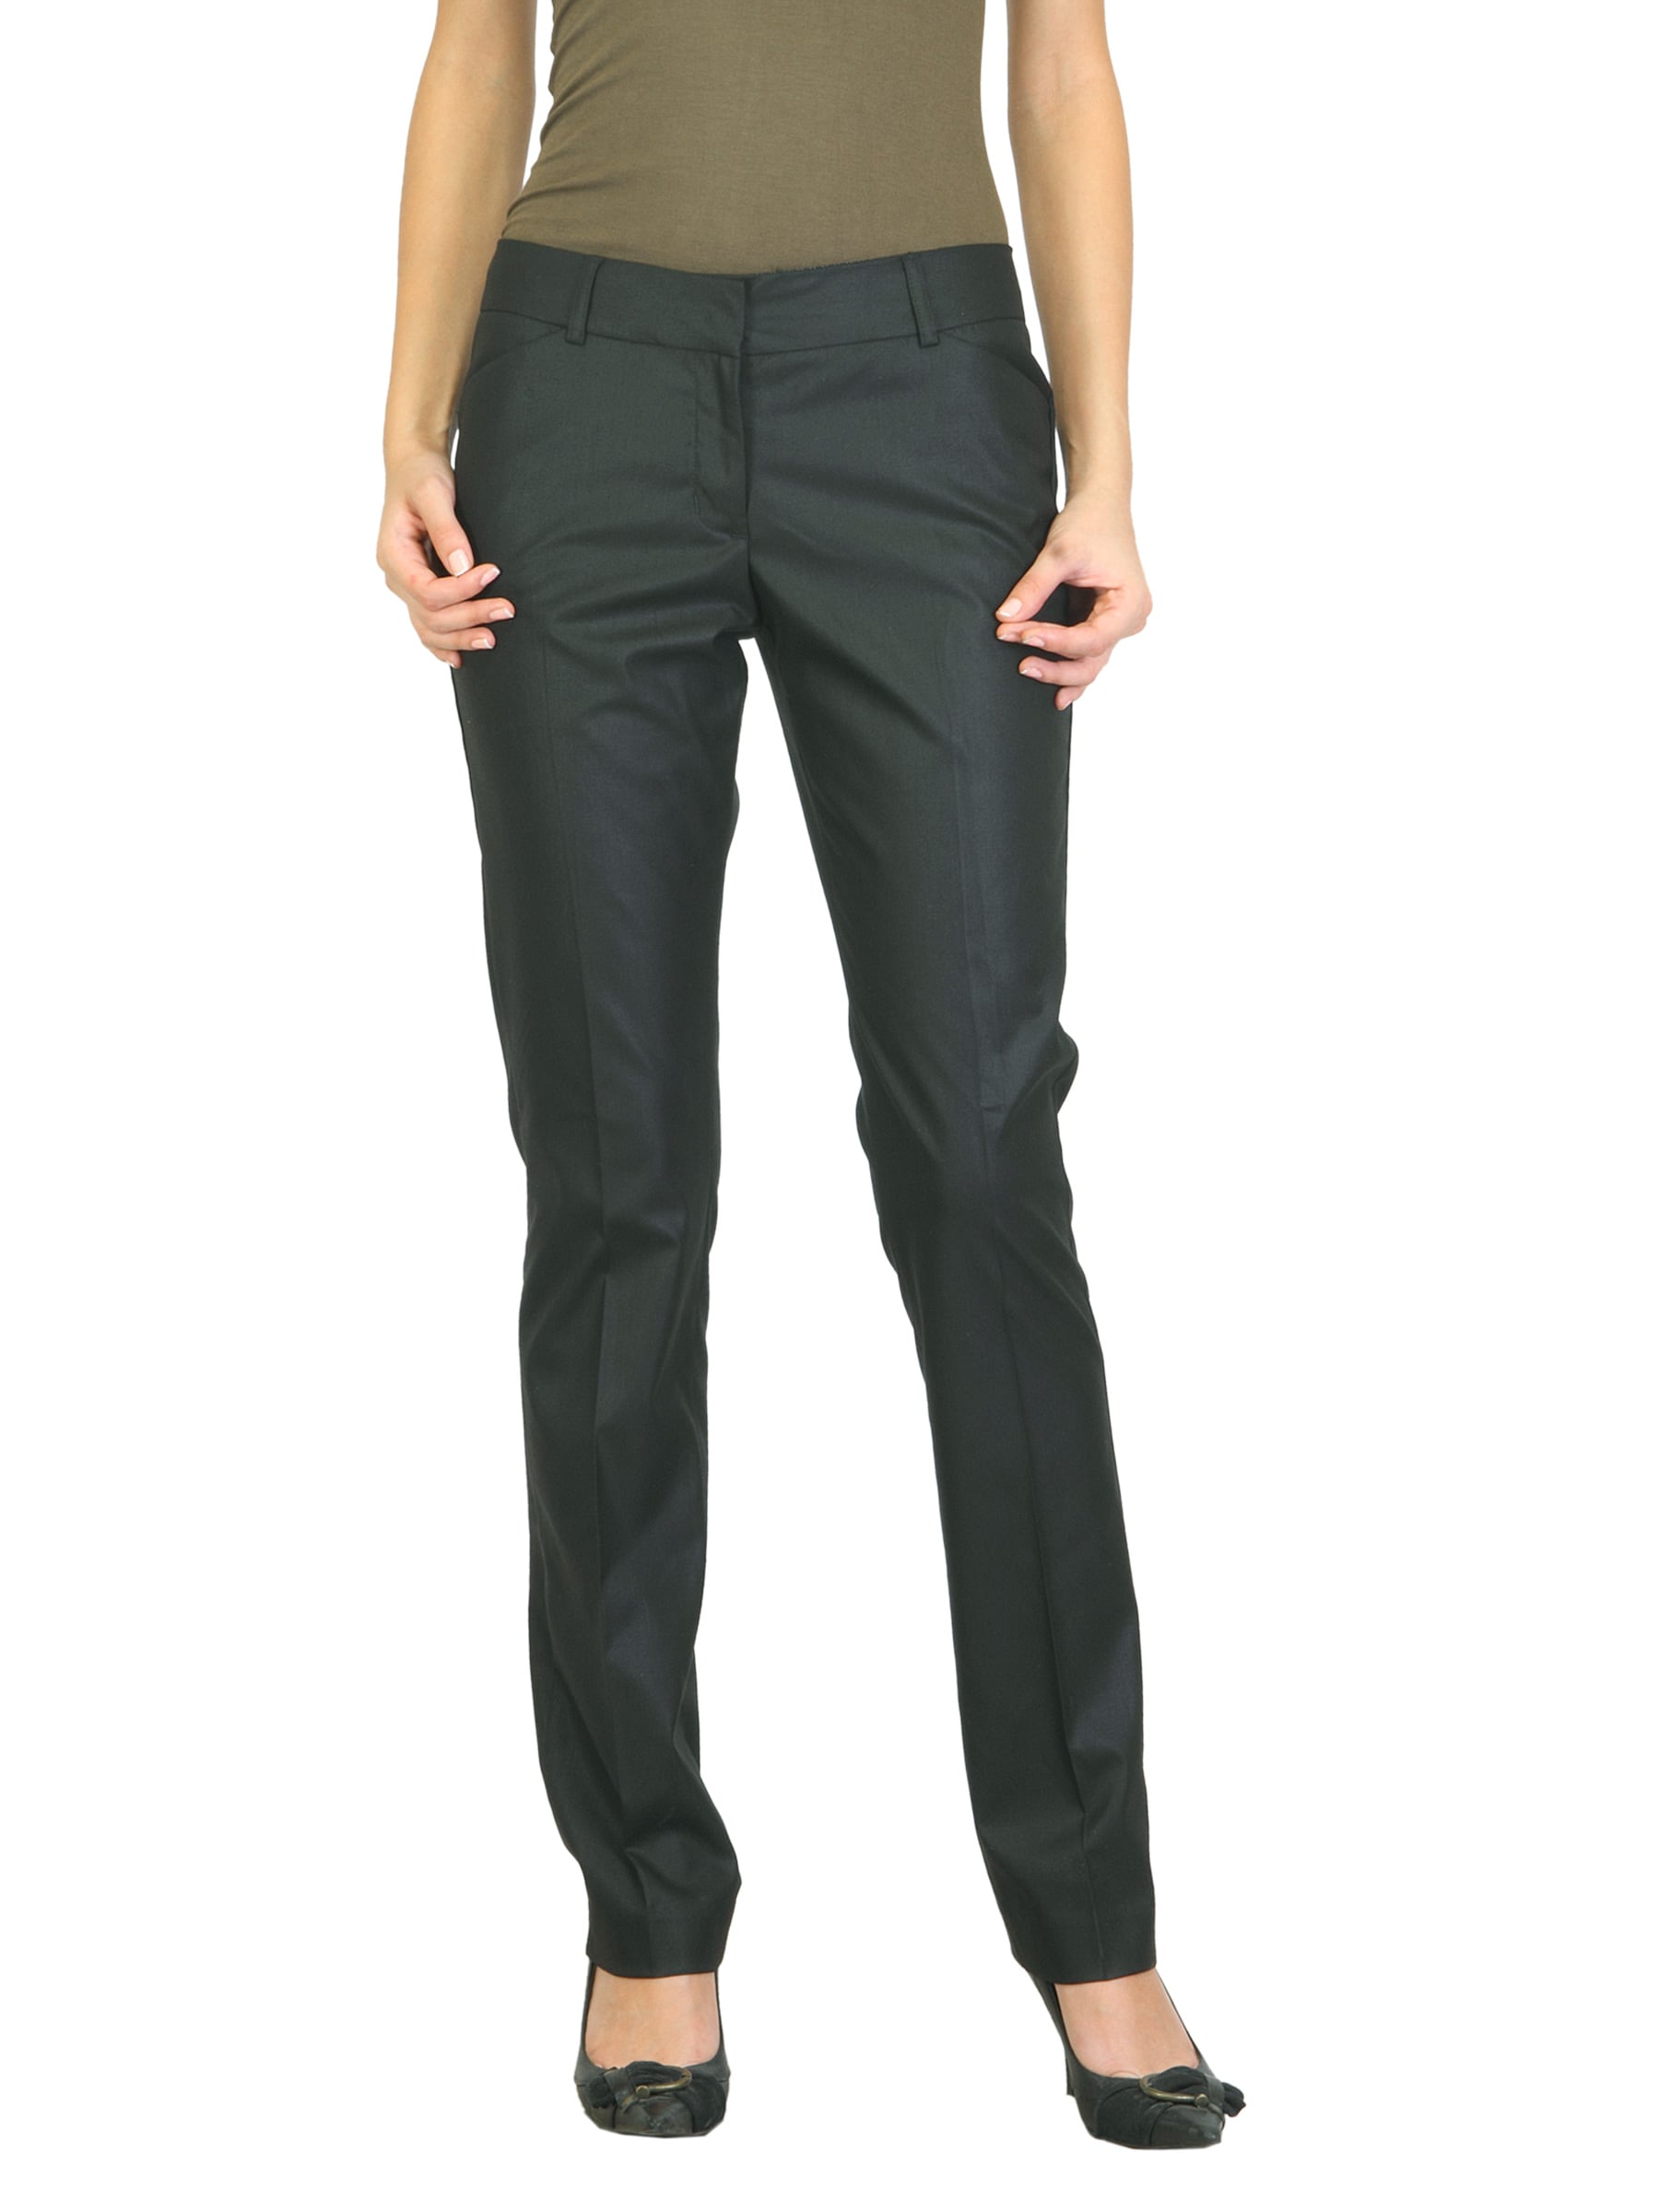 Scullers For Her Women Black Trousers